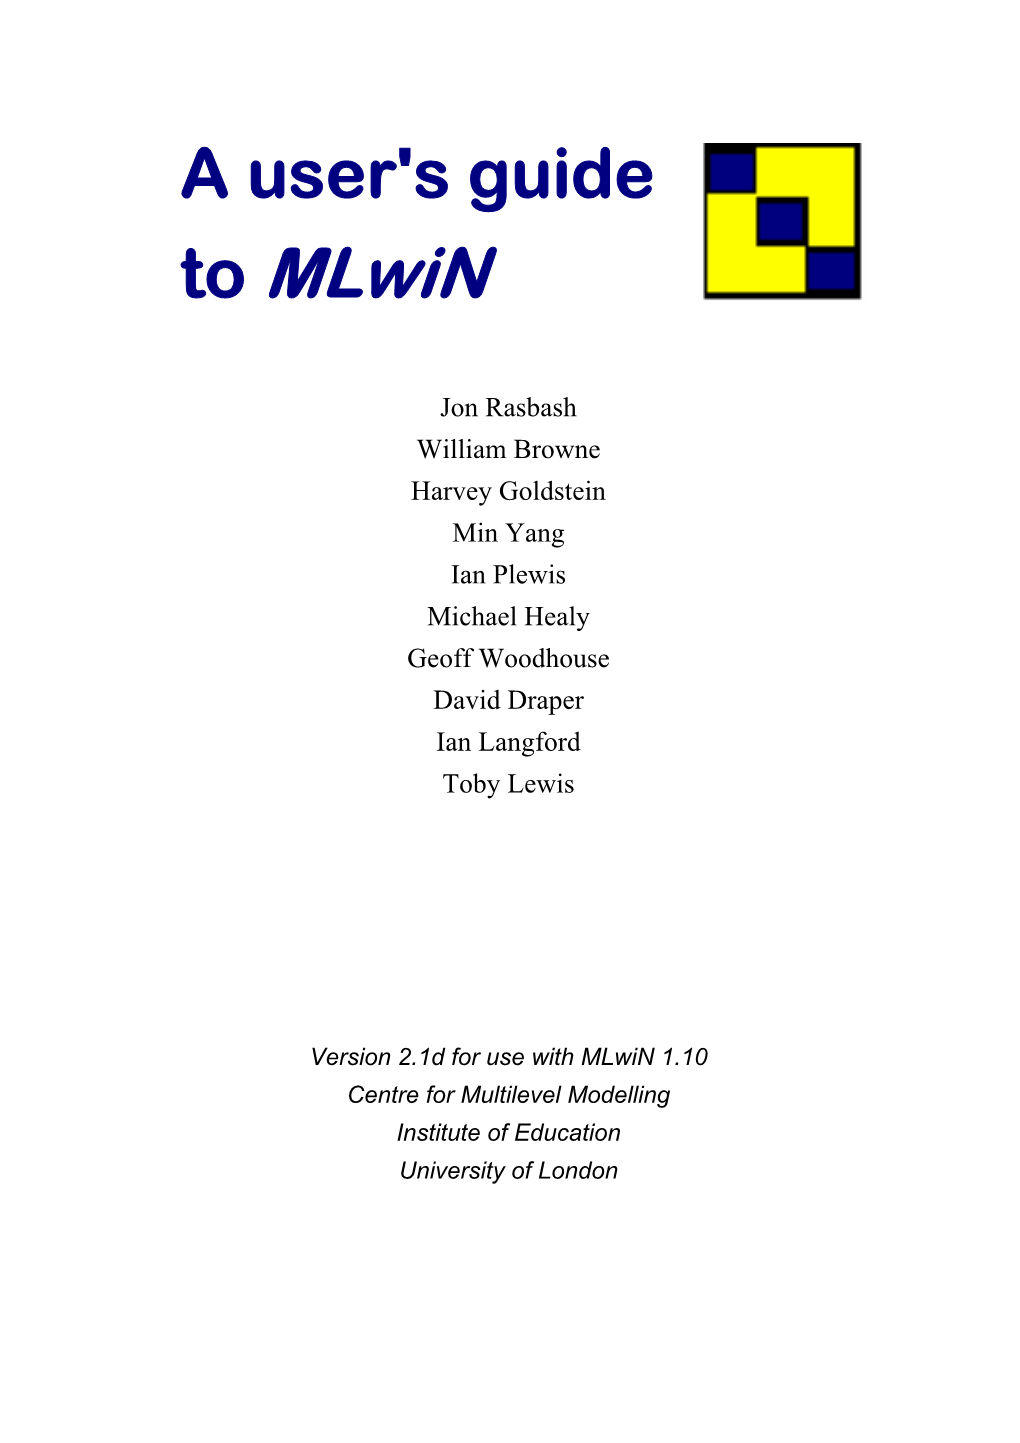 A User's Guide to Mlwin